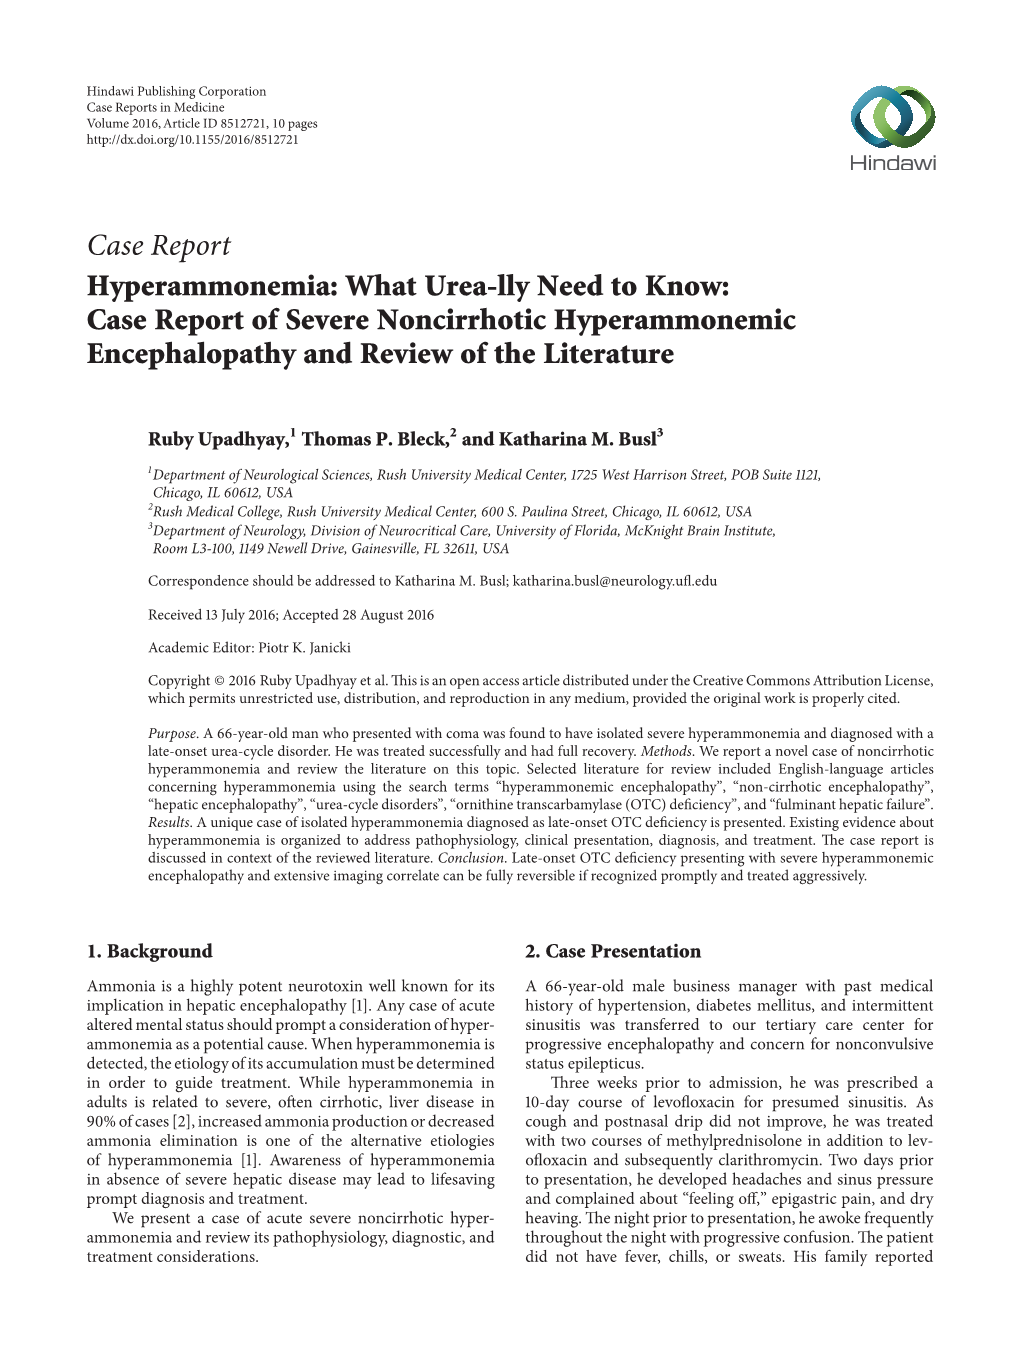 Hyperammonemia: What Urea-Lly Need to Know: Case Report of Severe Noncirrhotic Hyperammonemic Encephalopathy and Review of the Literature